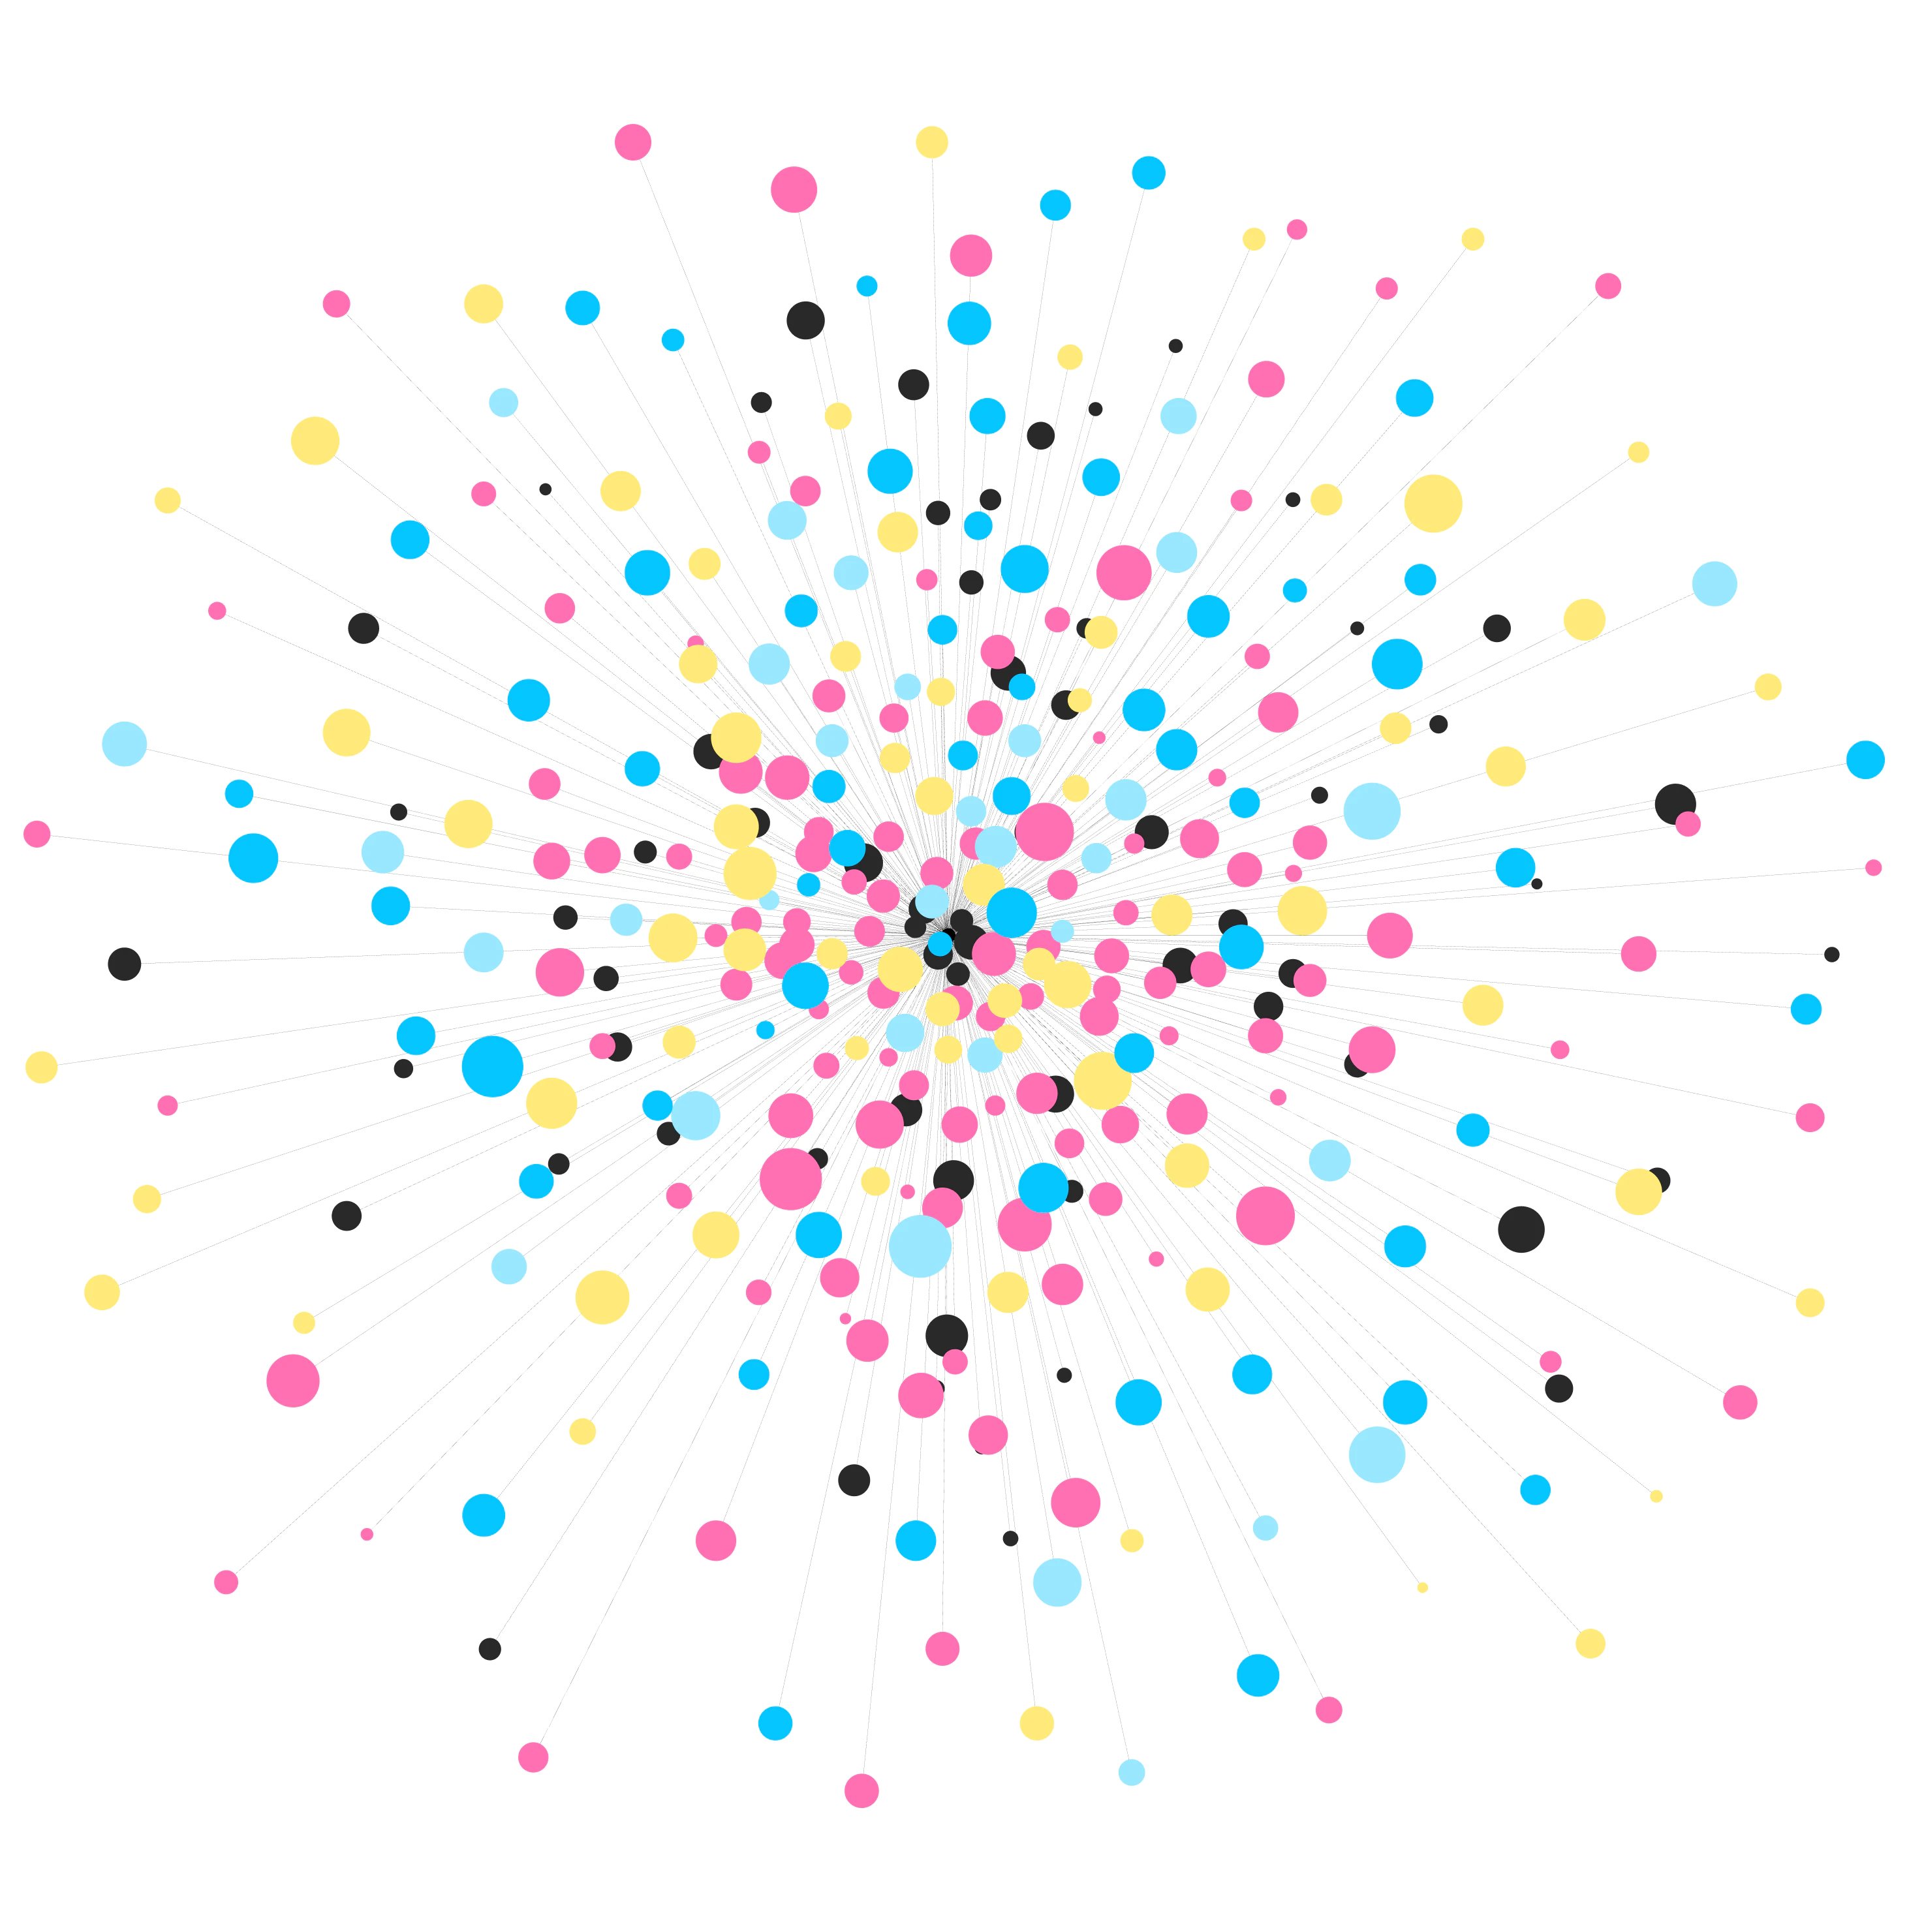 A graphic with dots in a firework pattern showing growth and expansion